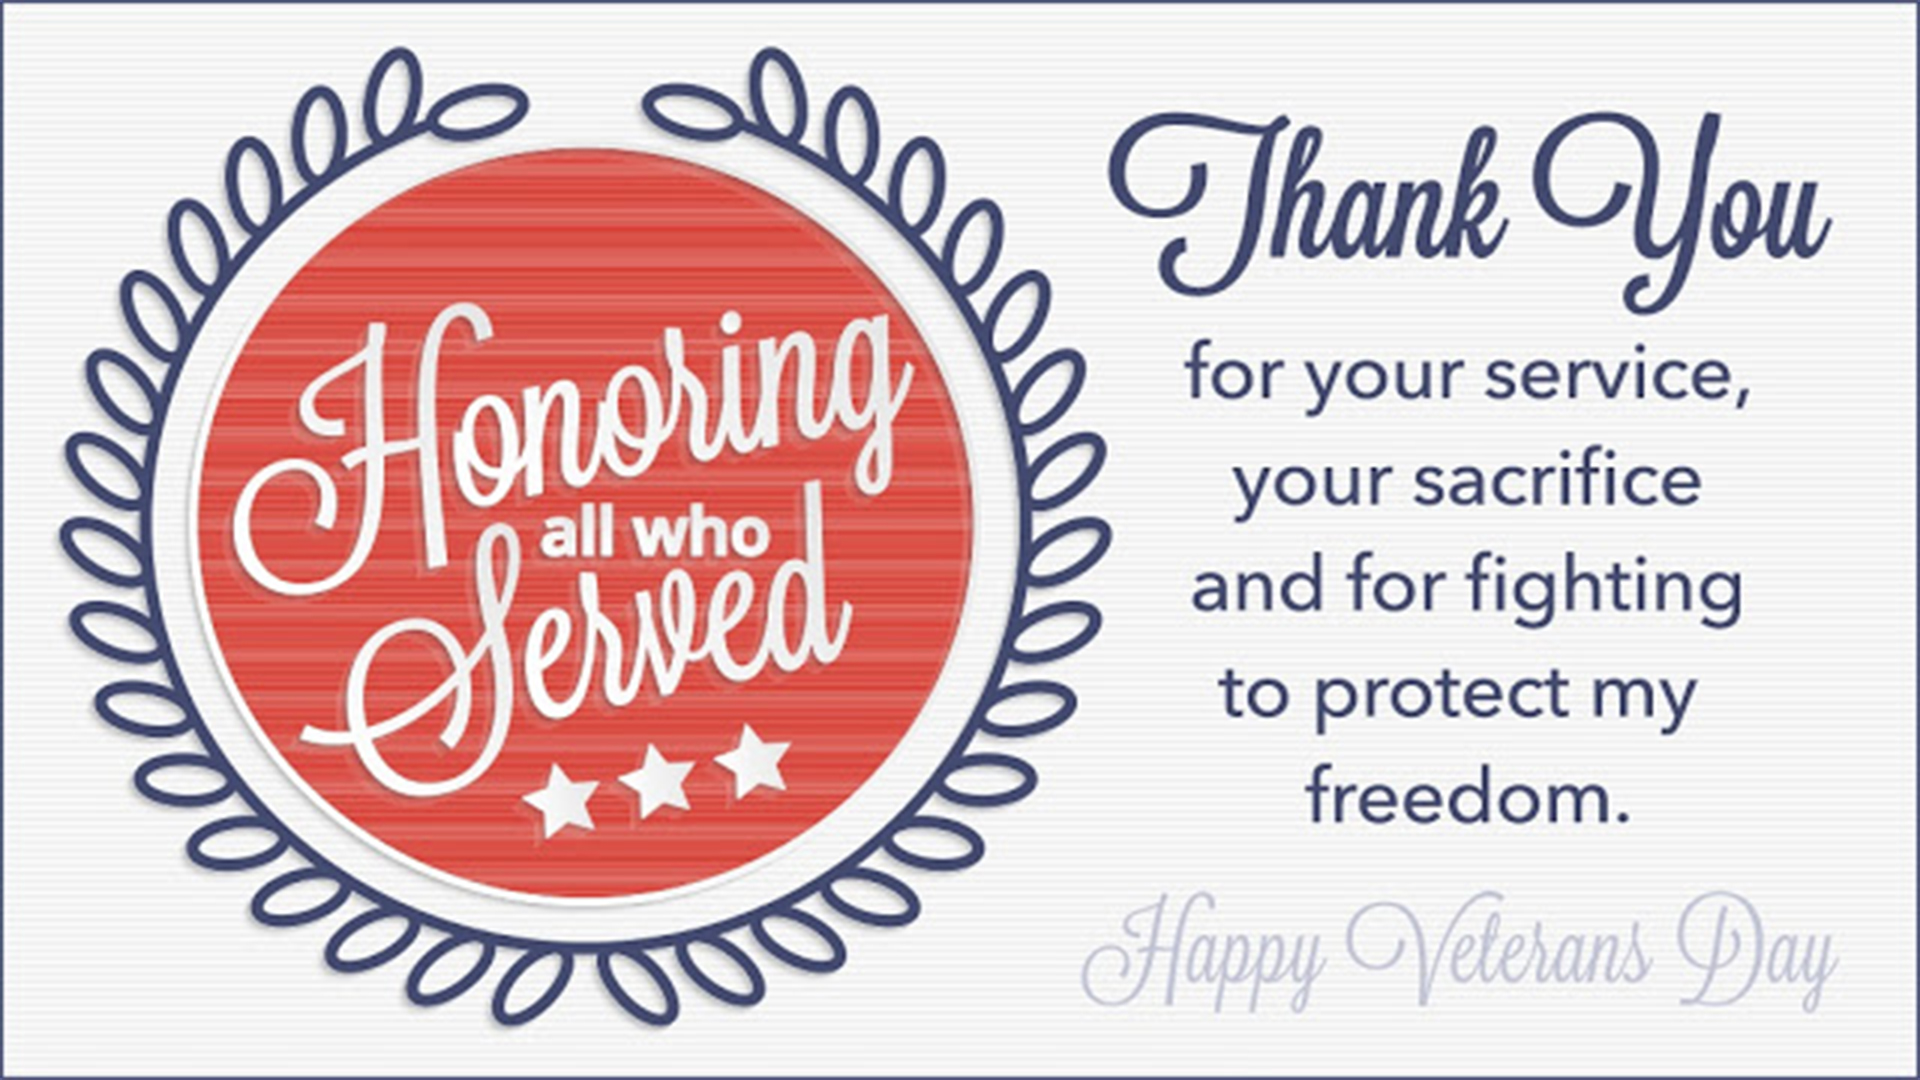 Veterans Day message image 2017